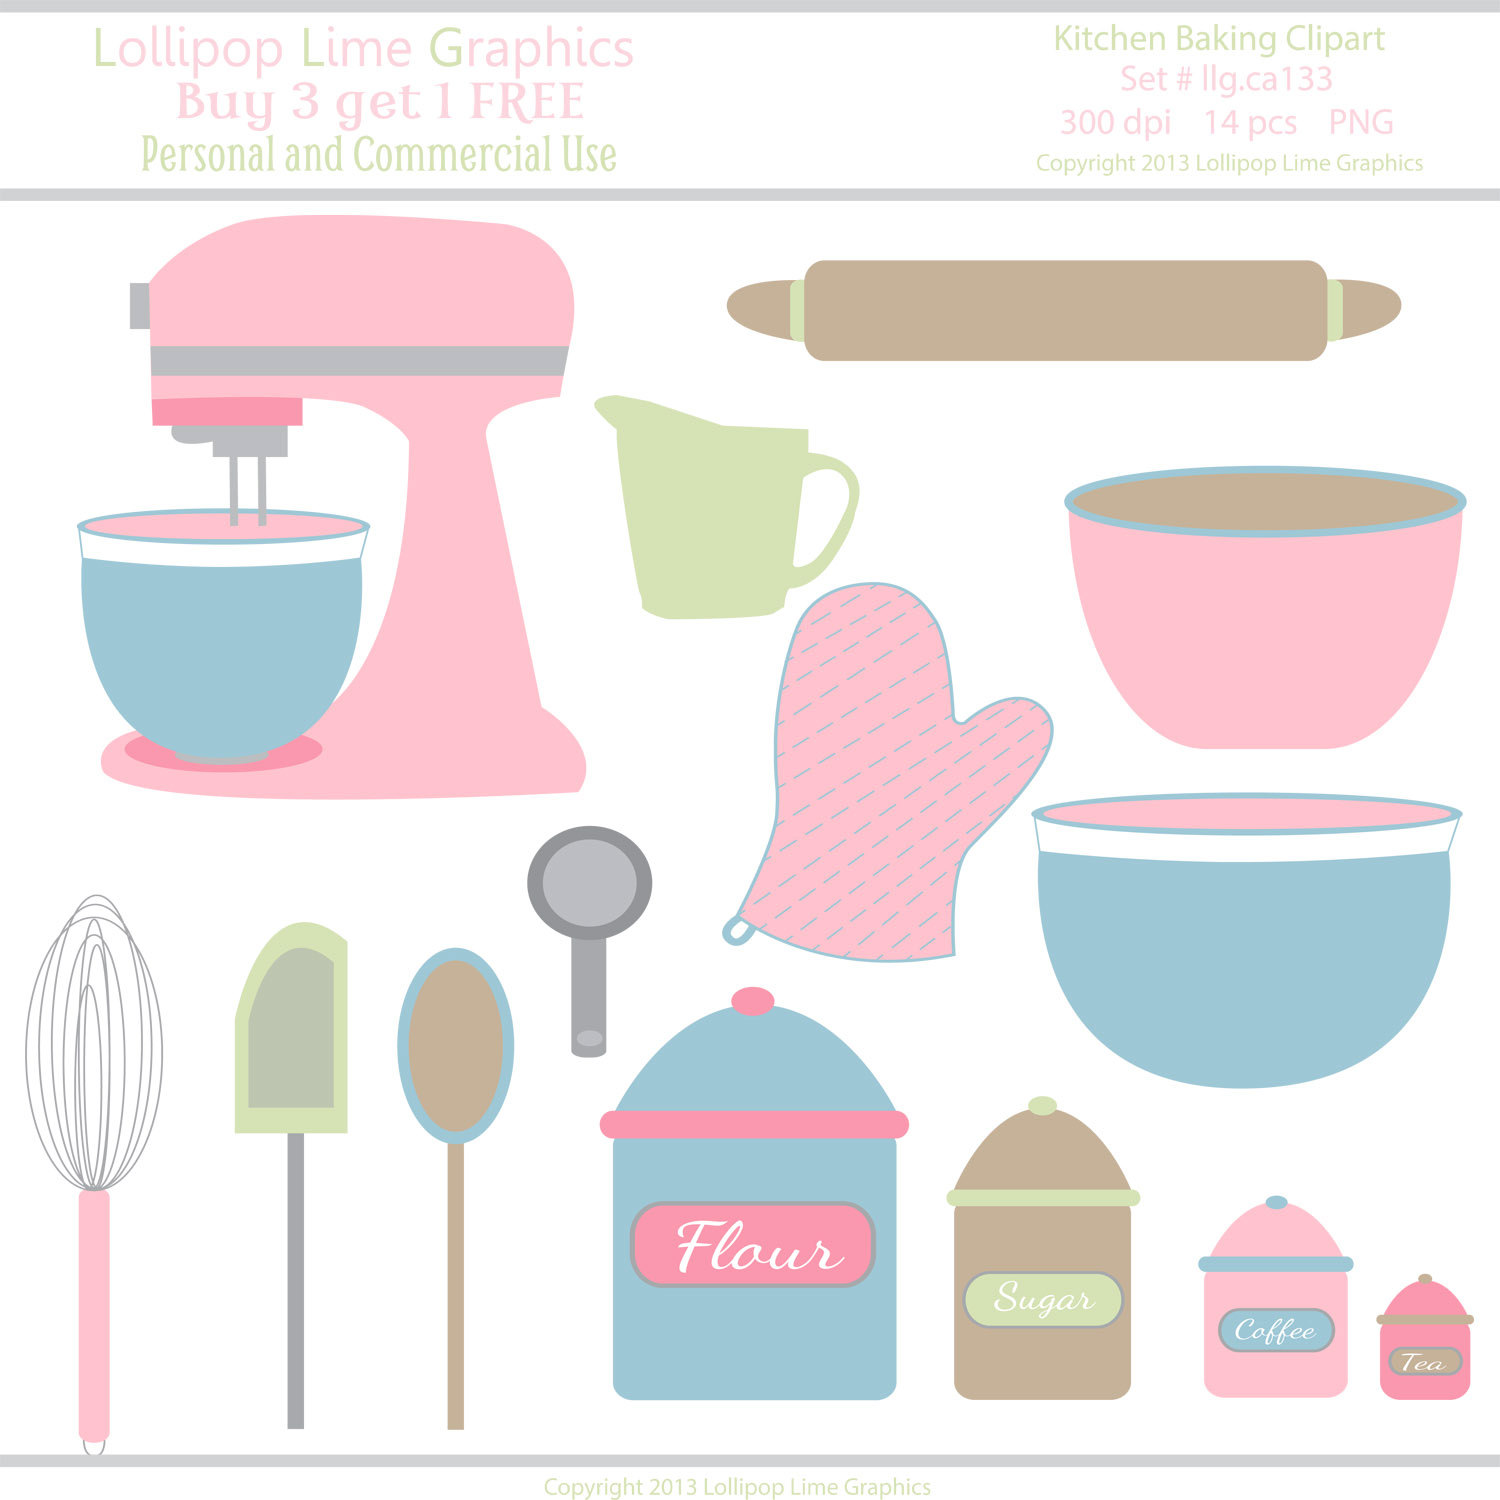 cooking tools clipart free - photo #5